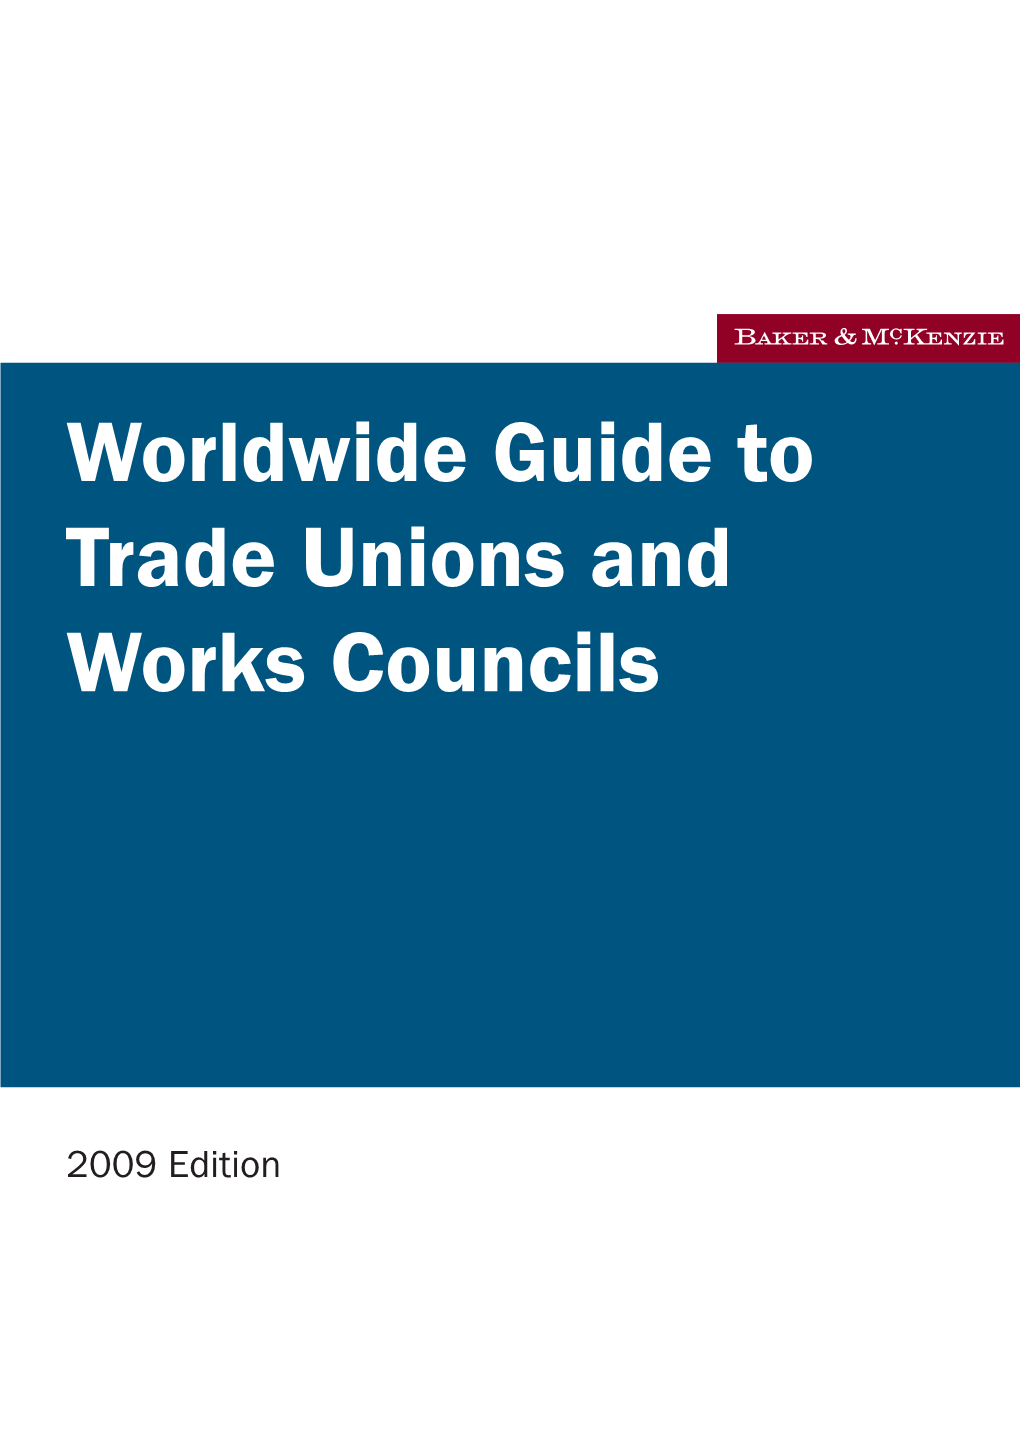 Worldwide Guide to Trade Unions and Works Councils